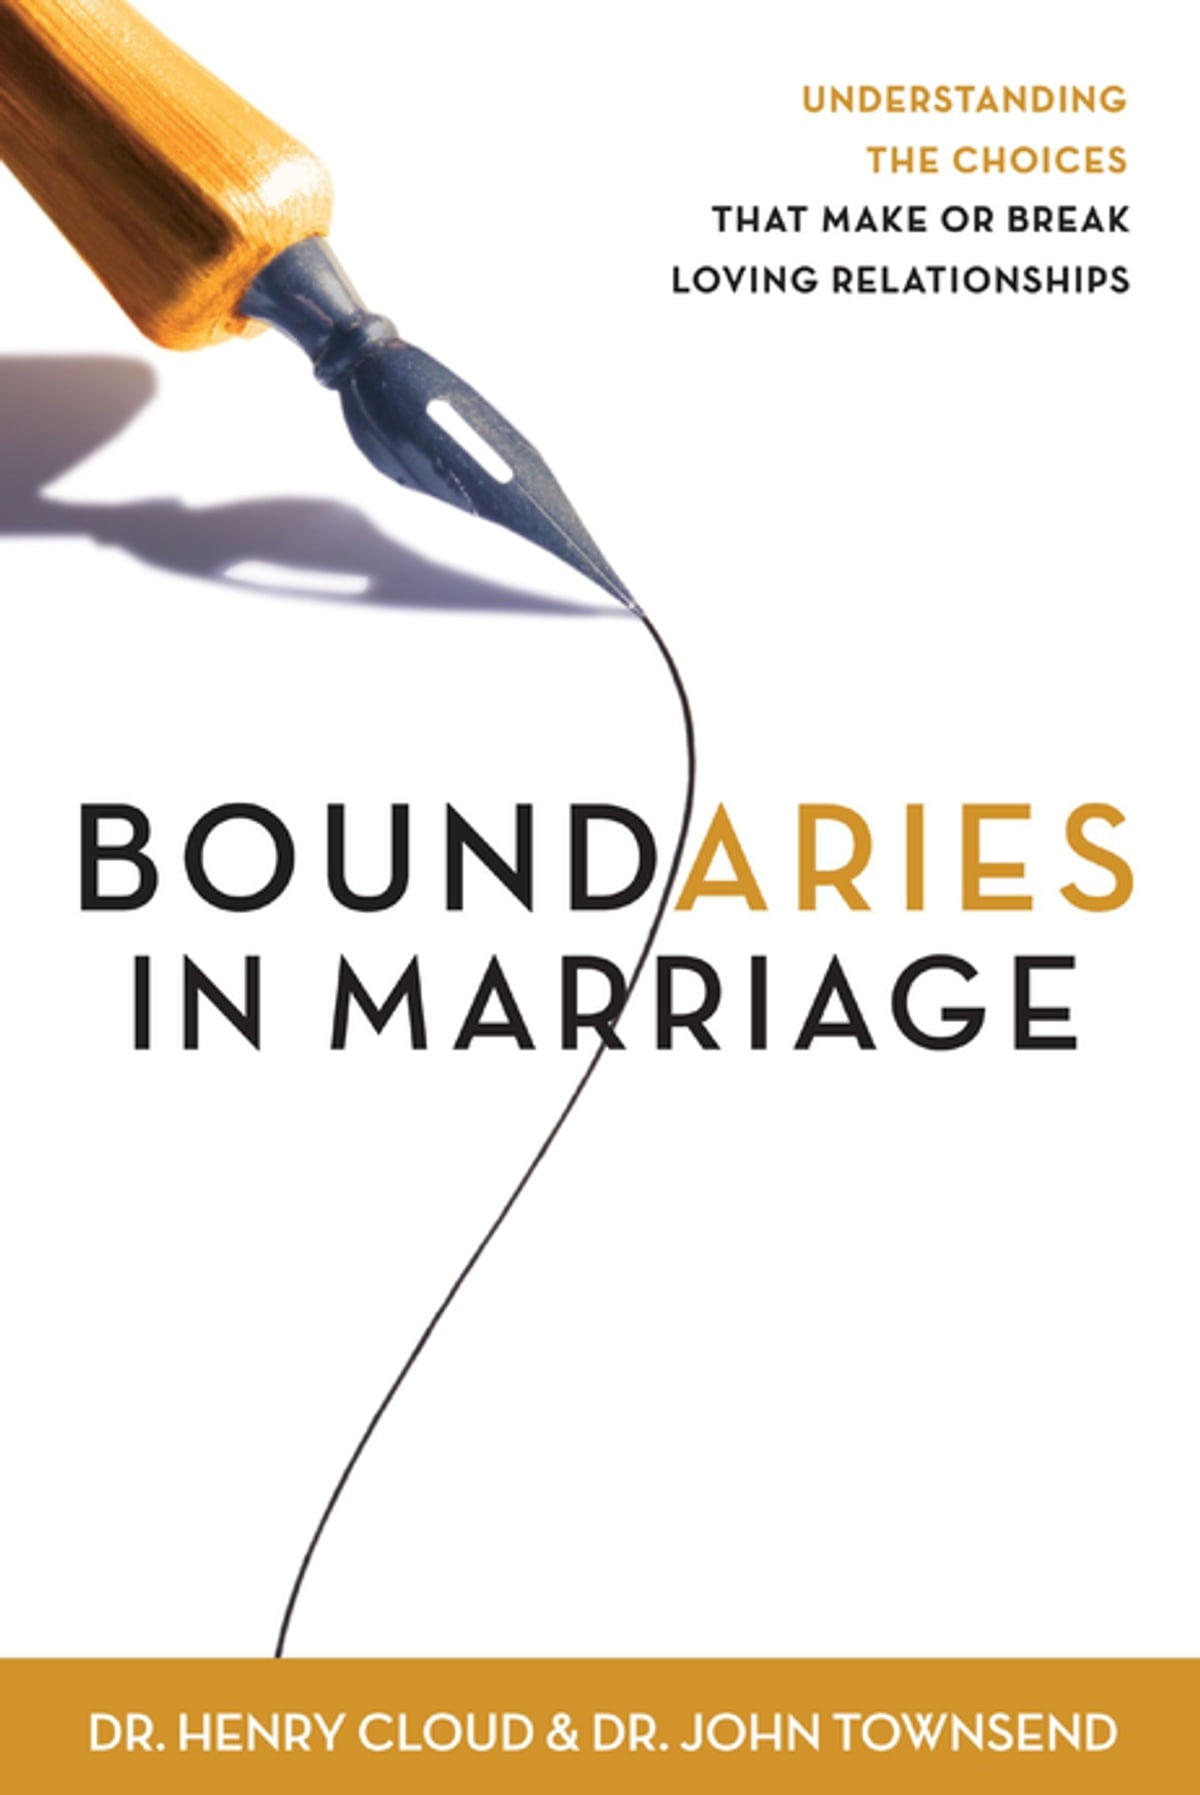 Boundaries in Marriage: Understanding the Choices That Make or Break Loving Relationships by Henry Cloud